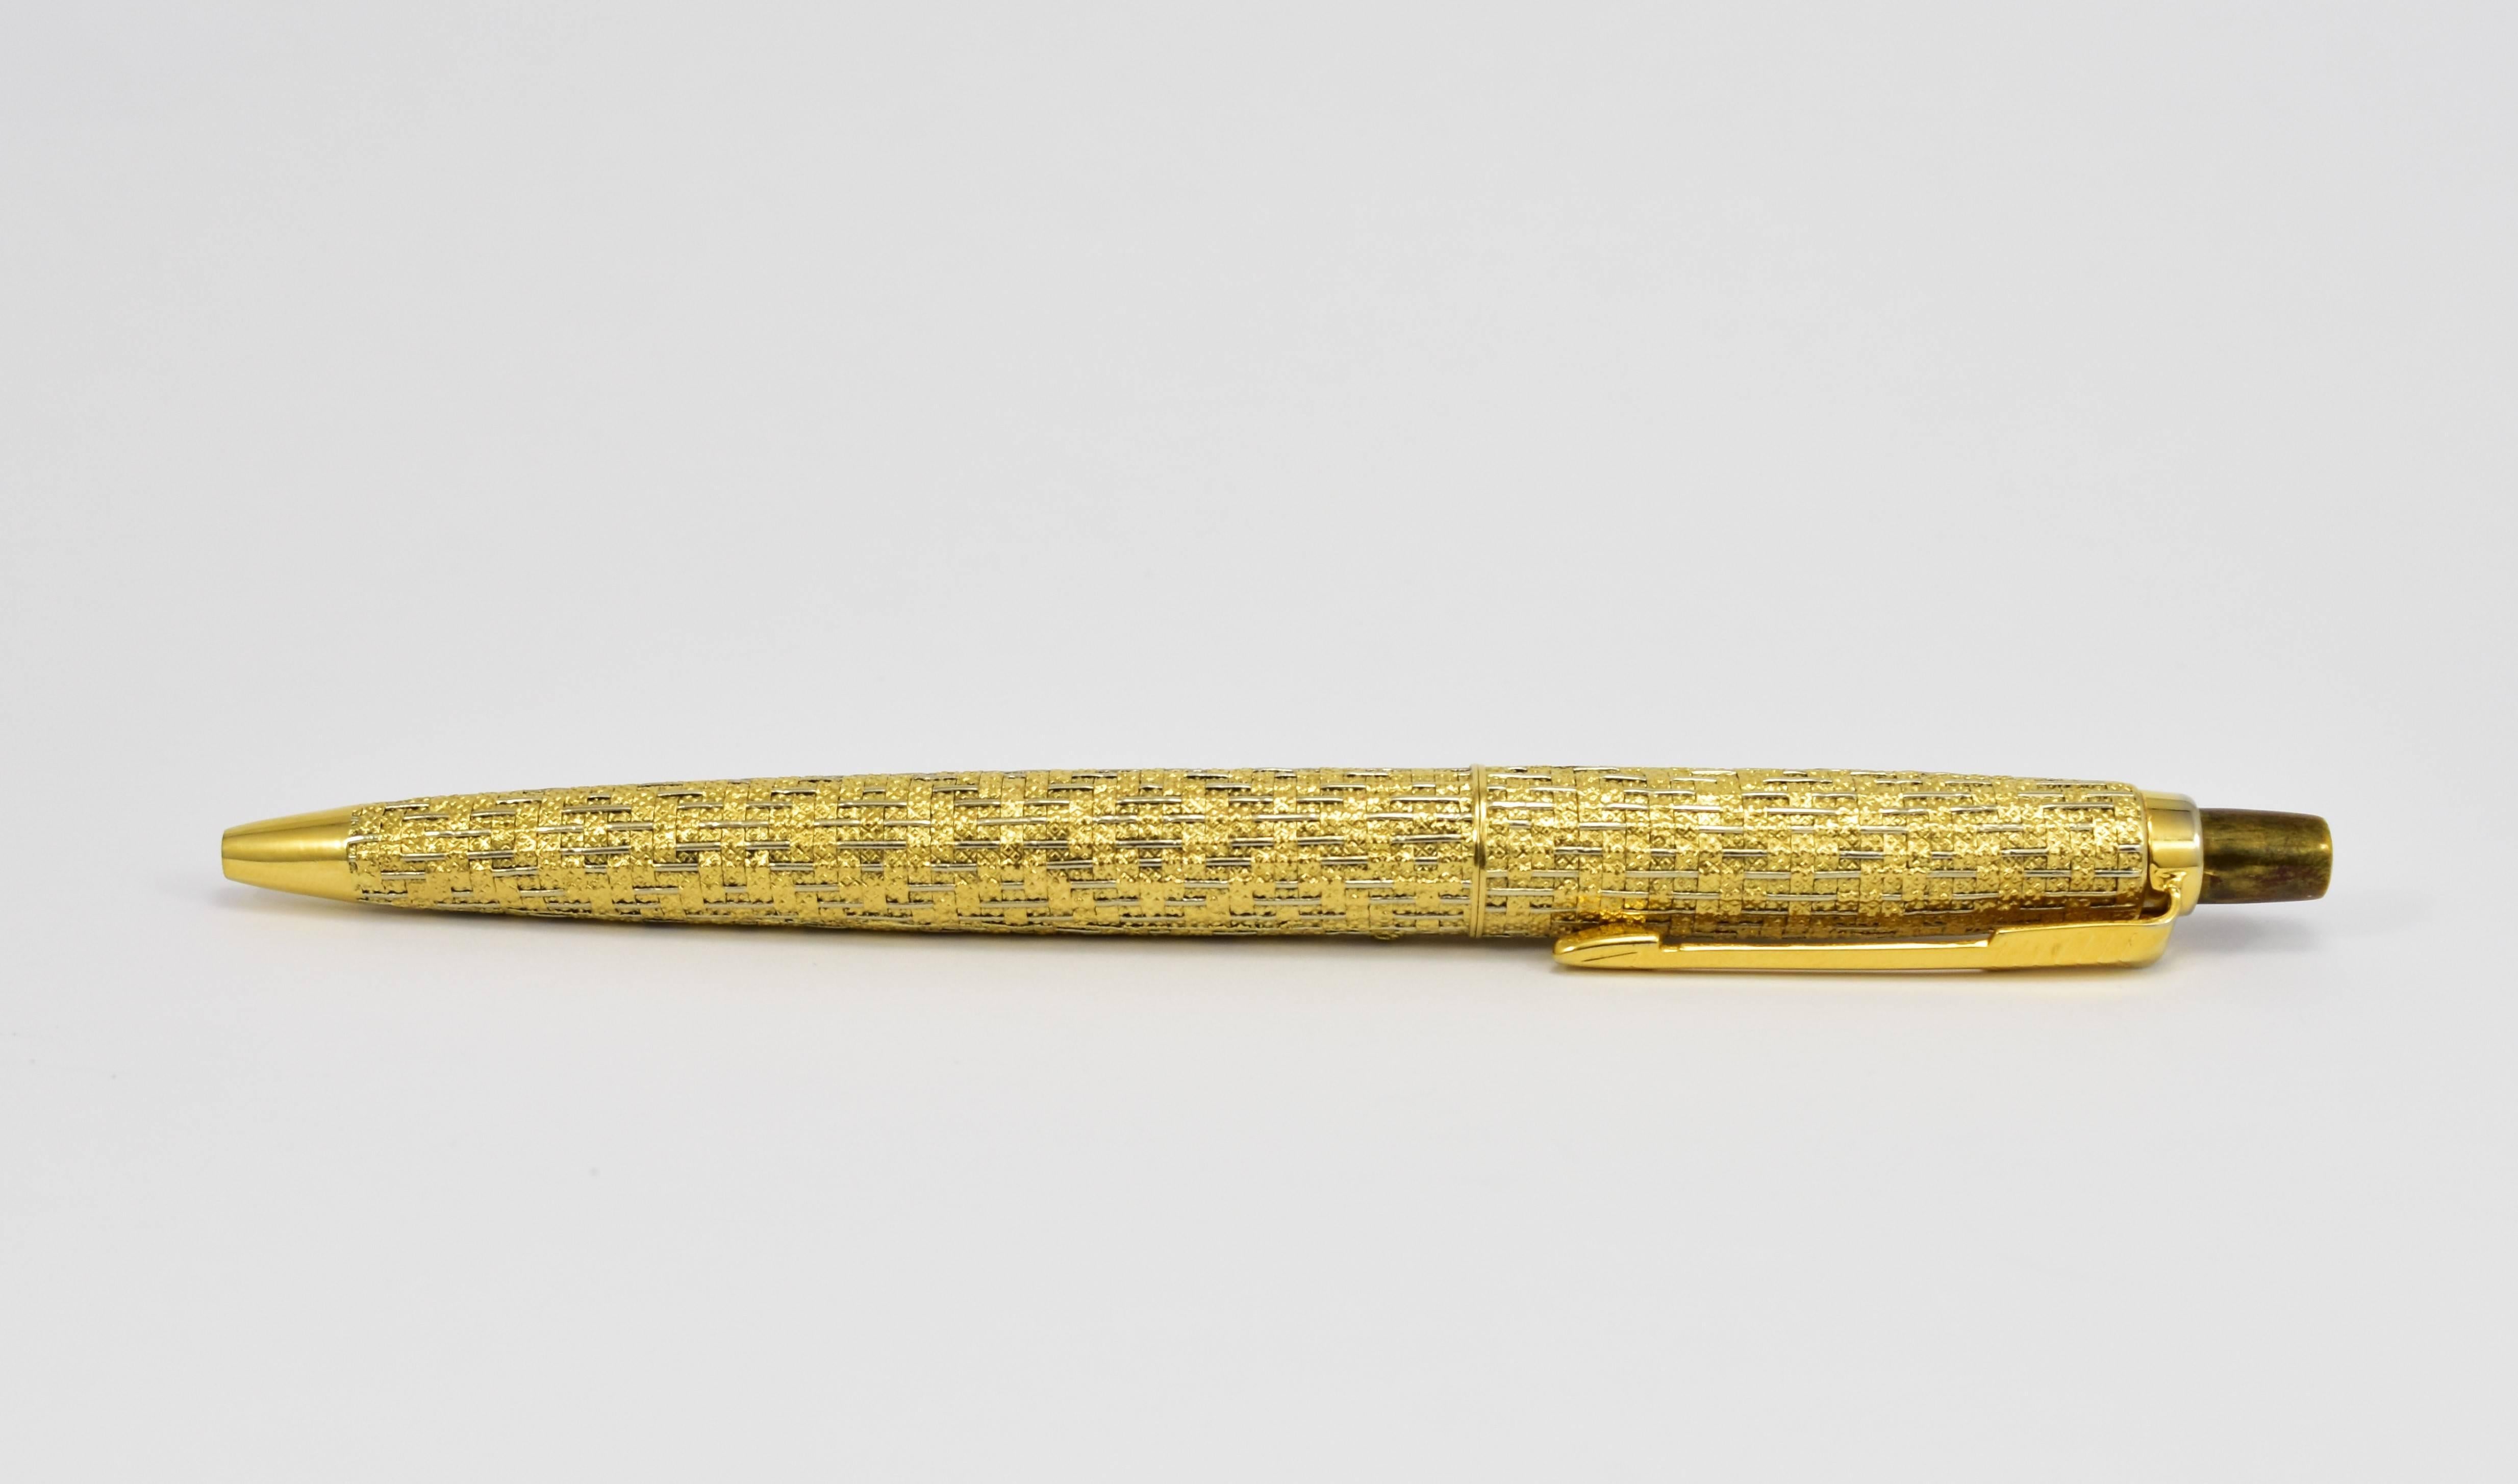 Elegant Parker ballpoint pen incased in (tested as) 18-karat white and yellow gold. Stamped 750. No Hallmark as orignated abroad. It features an intricate basketweave design. Beautiful workmanship and easy to use, carry, or give as a gift. Needs a